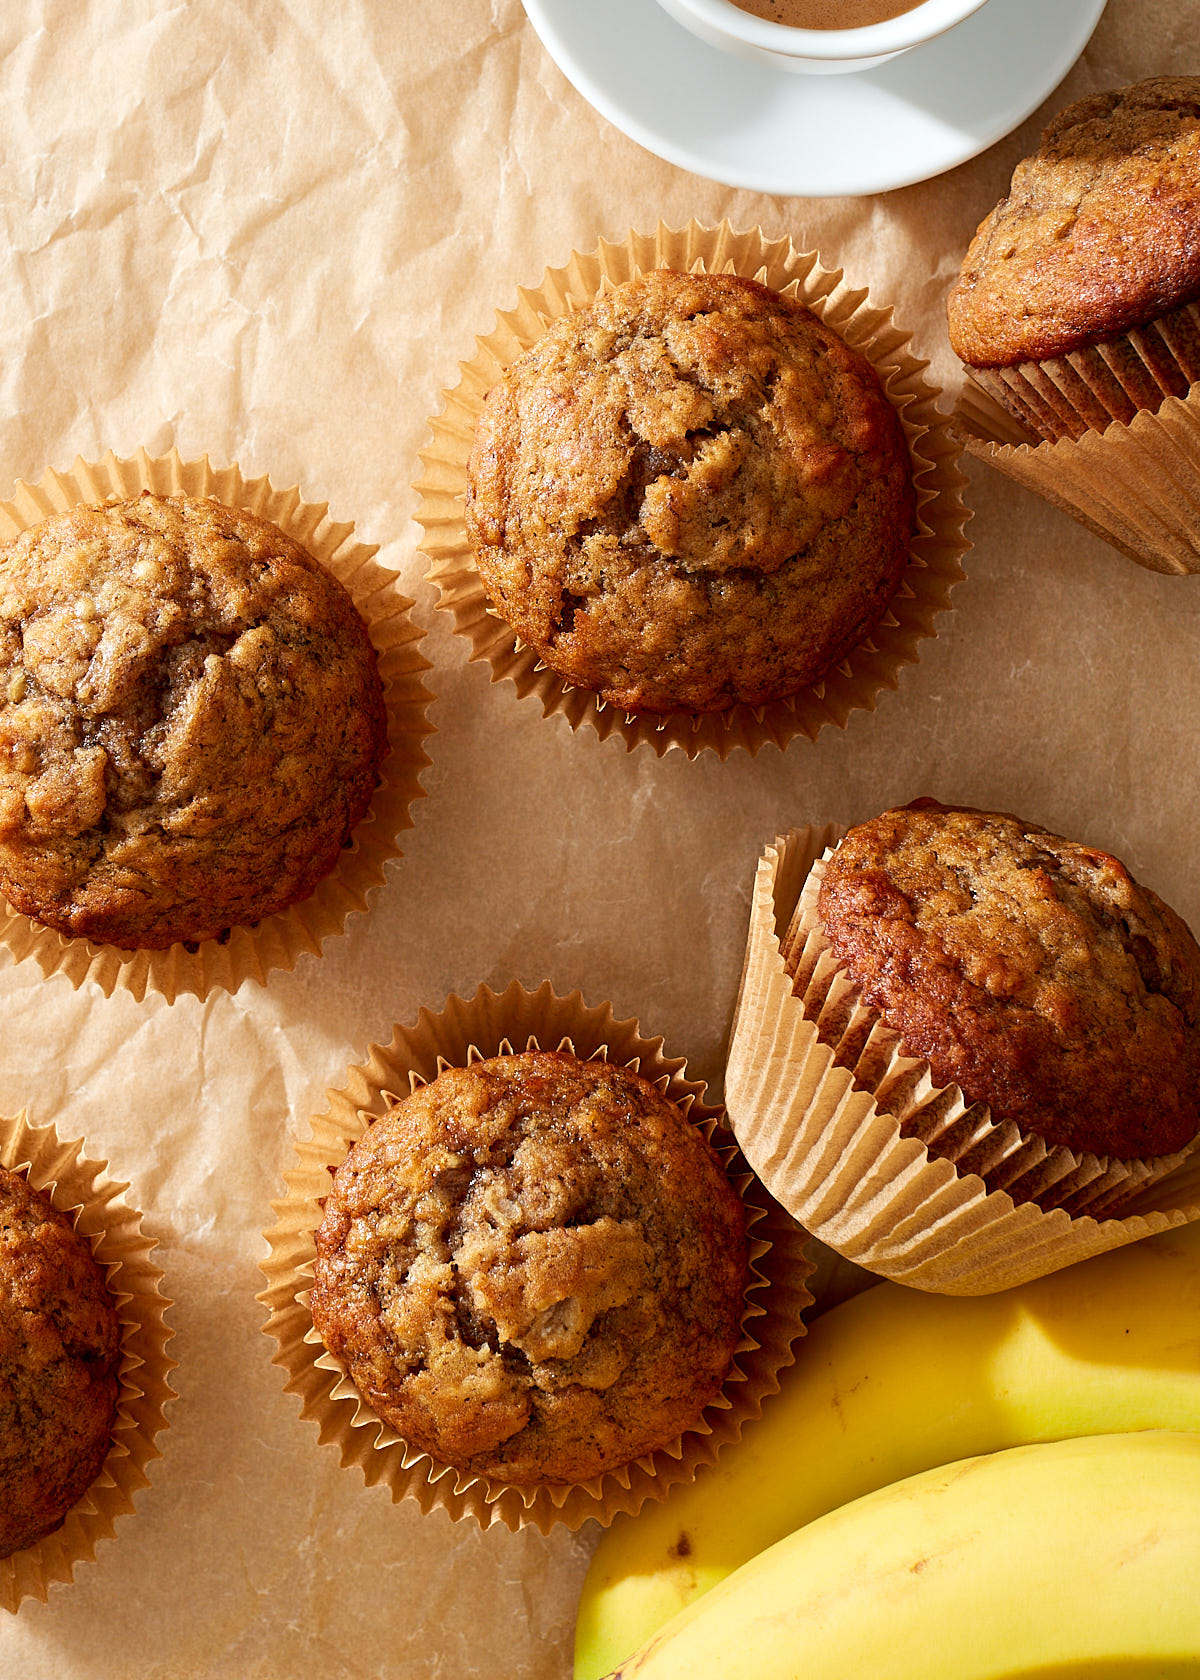 Simple banana muffins on natural parchment paper with a cup of espresso and a bunch of yellow bananas.